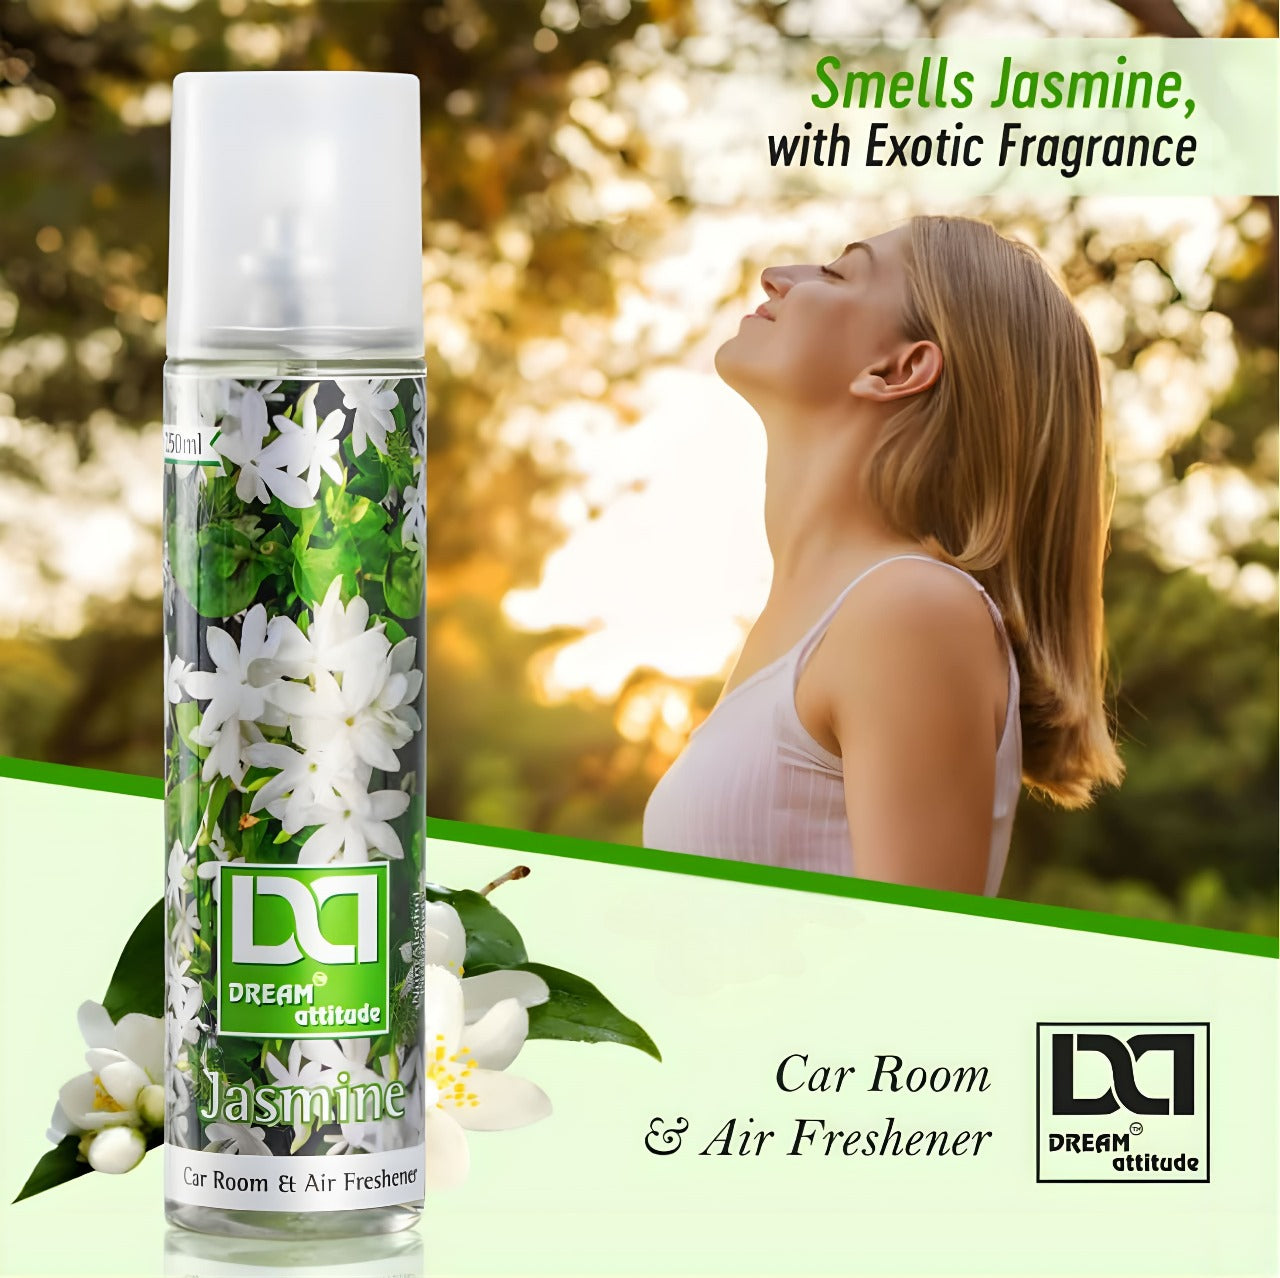 DREAM attitude Jasmine Air Freshener: Tranquil Elegance and Soothing Aroma